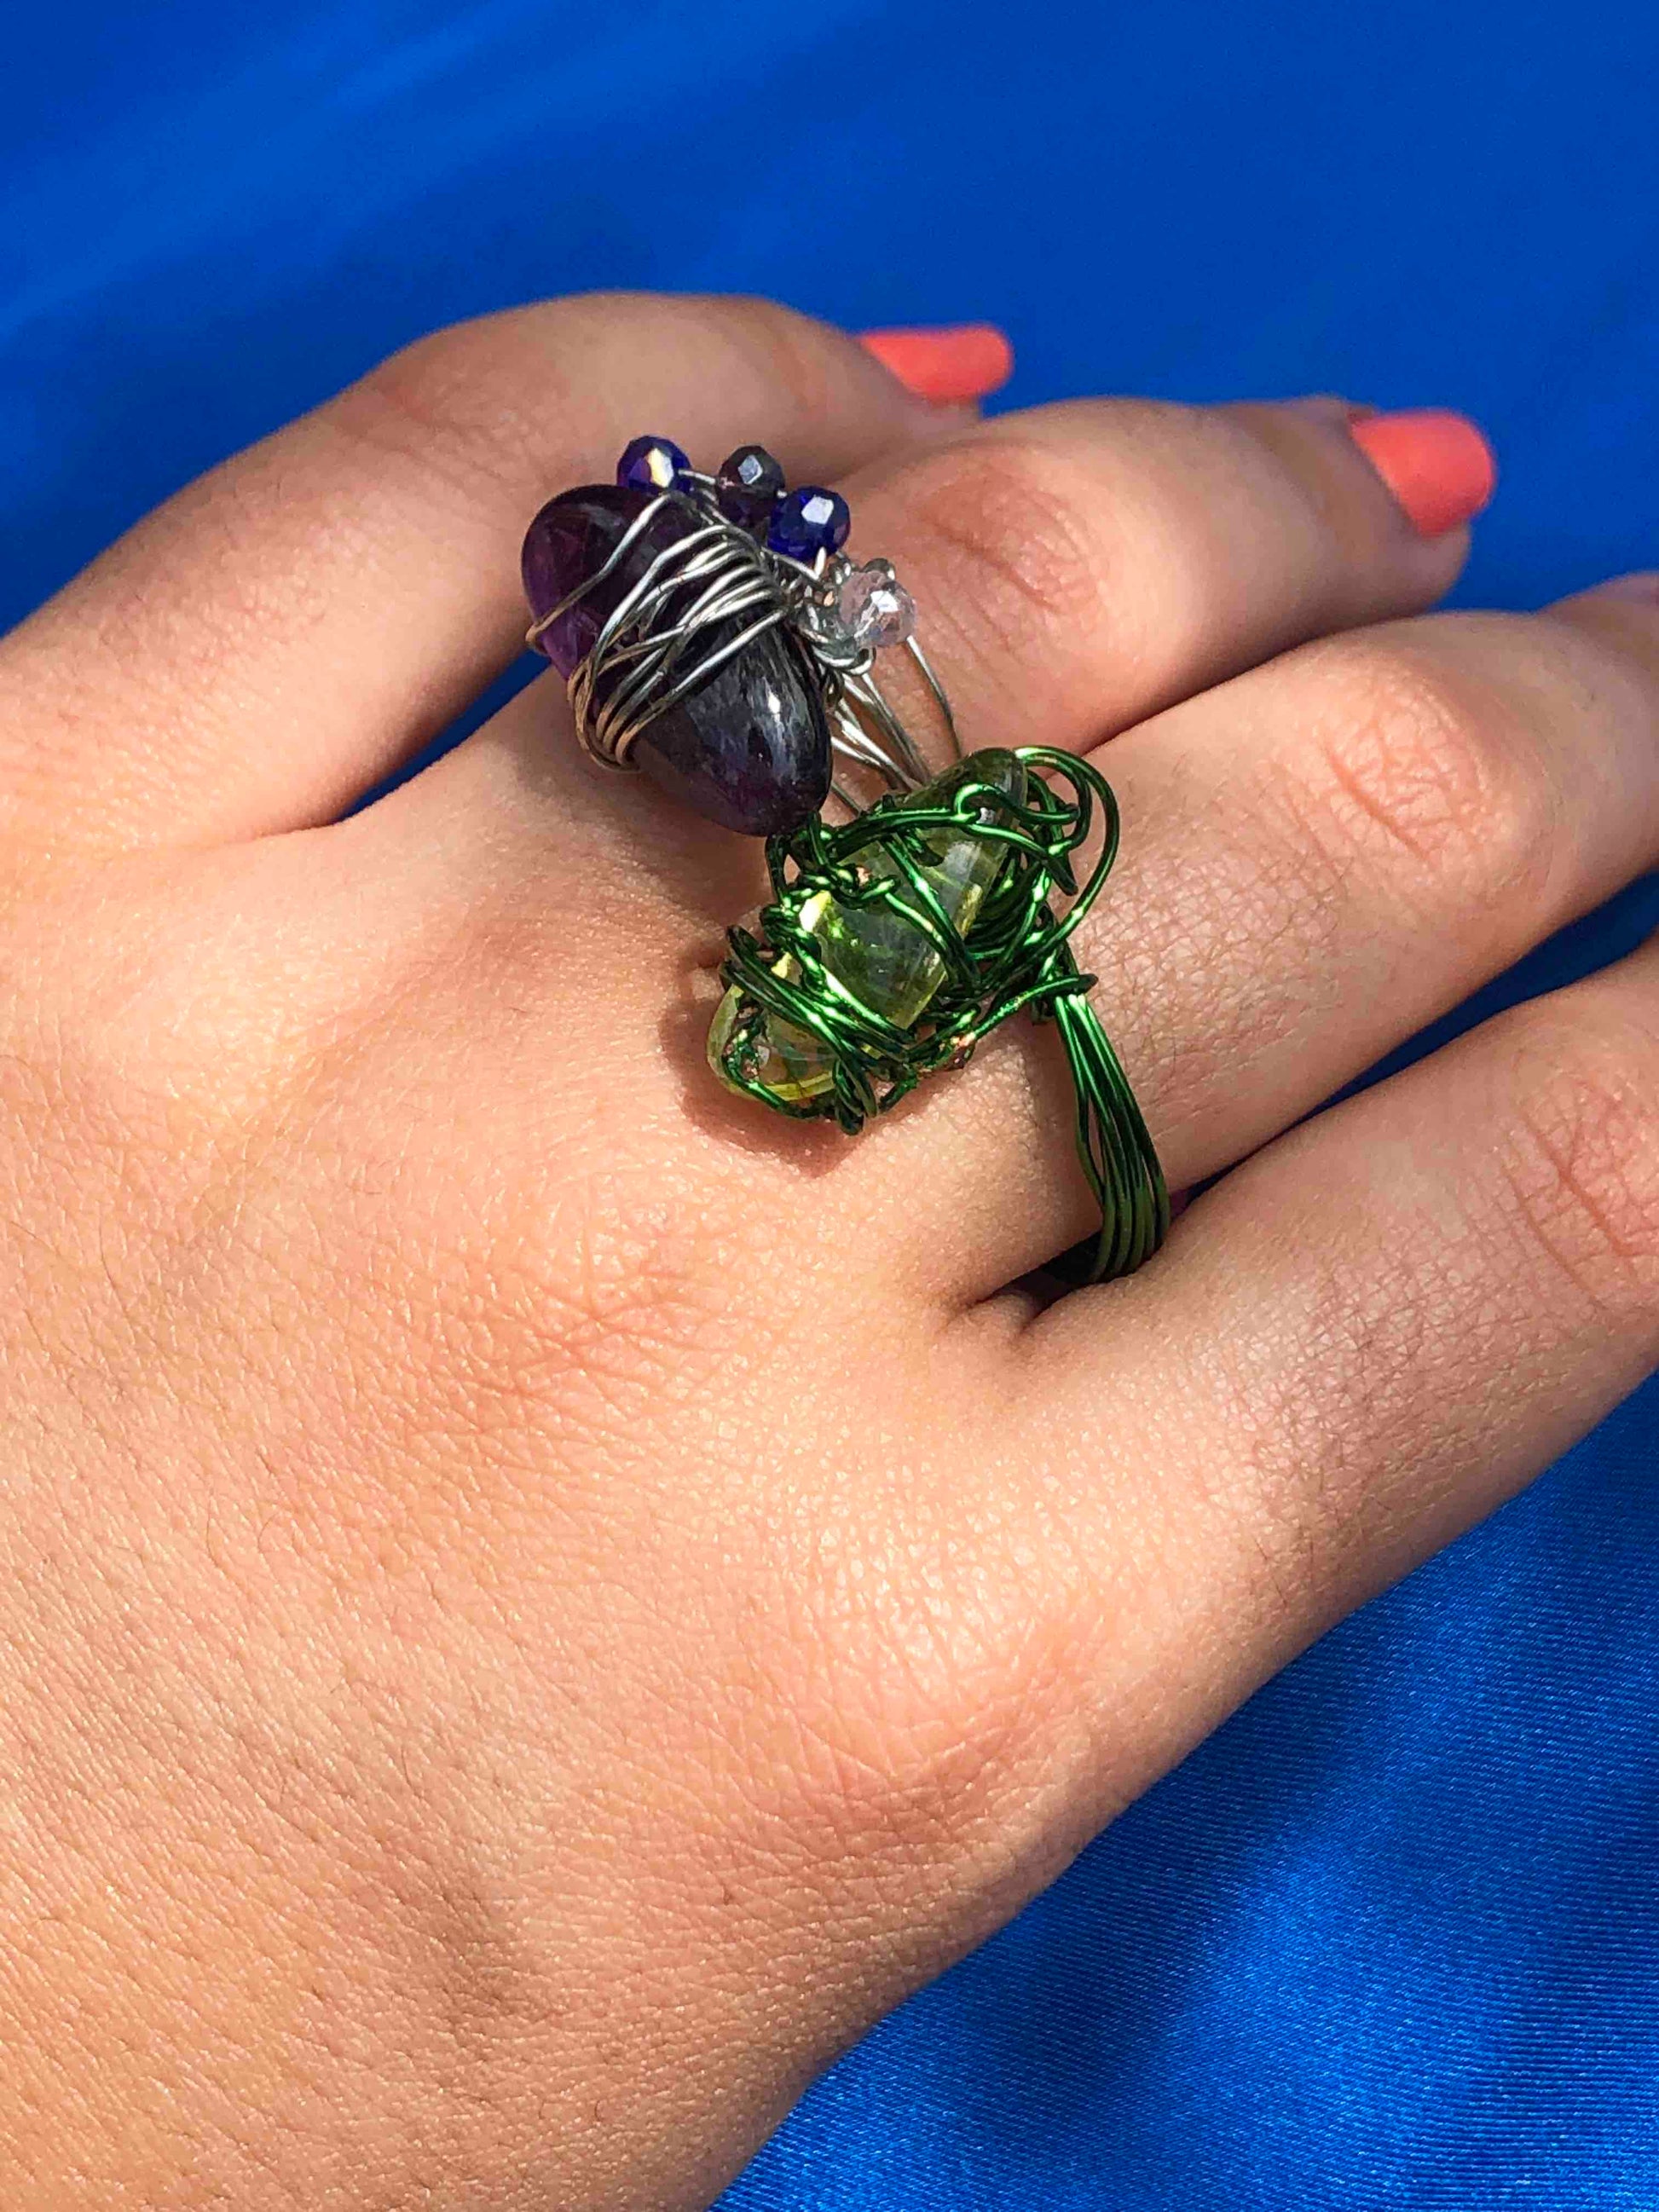 handmade blue and clear crystal beaded silver wire wrapped ring with a tourmaline centerpiece. 